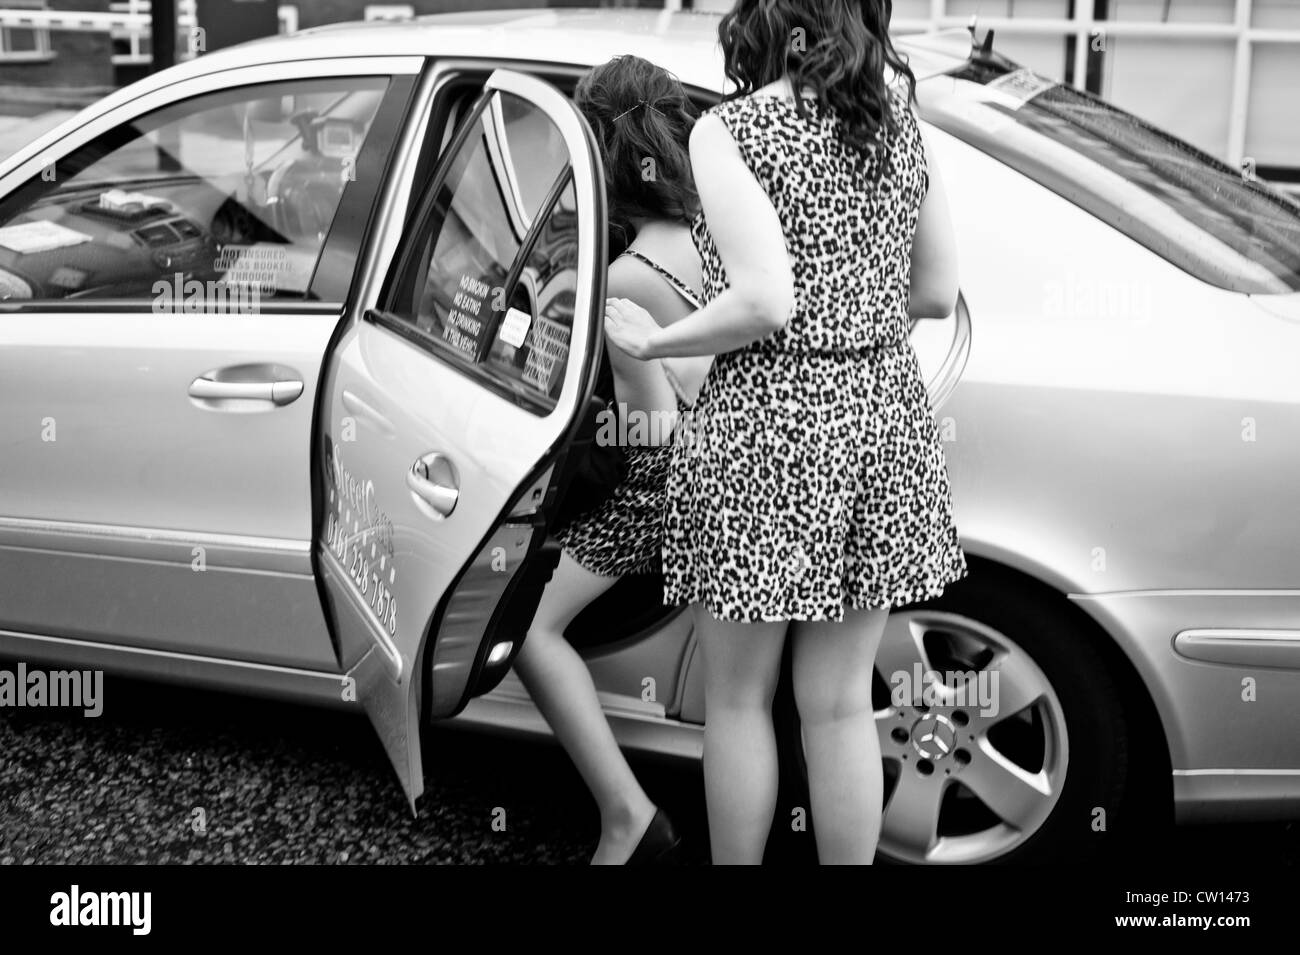 Manchester, UK - 4 August 2012: two leopardskin dressed girls get into a cab getting ready for a night out. Stock Photo